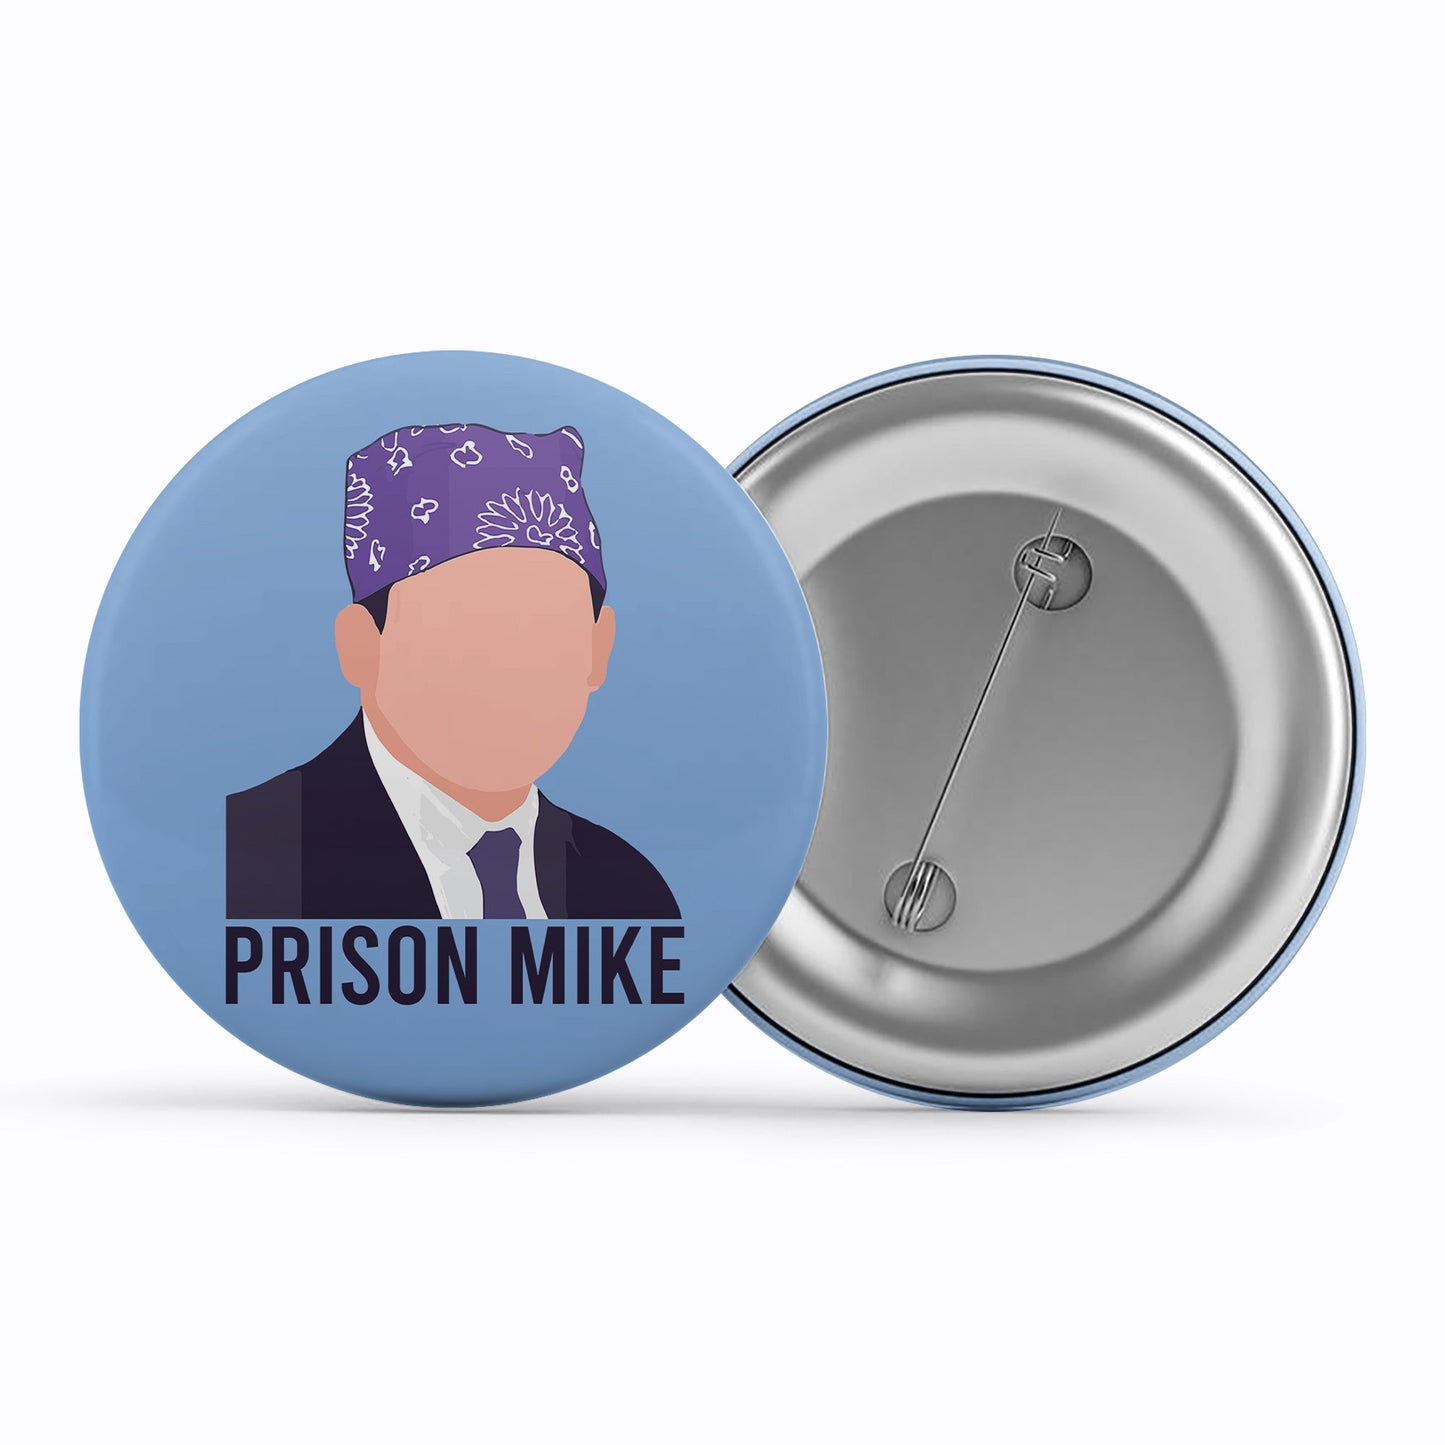 the office prison mike badge pin button tv & movies buy online india the banyan tee tbt men women girls boys unisex  - michael scott